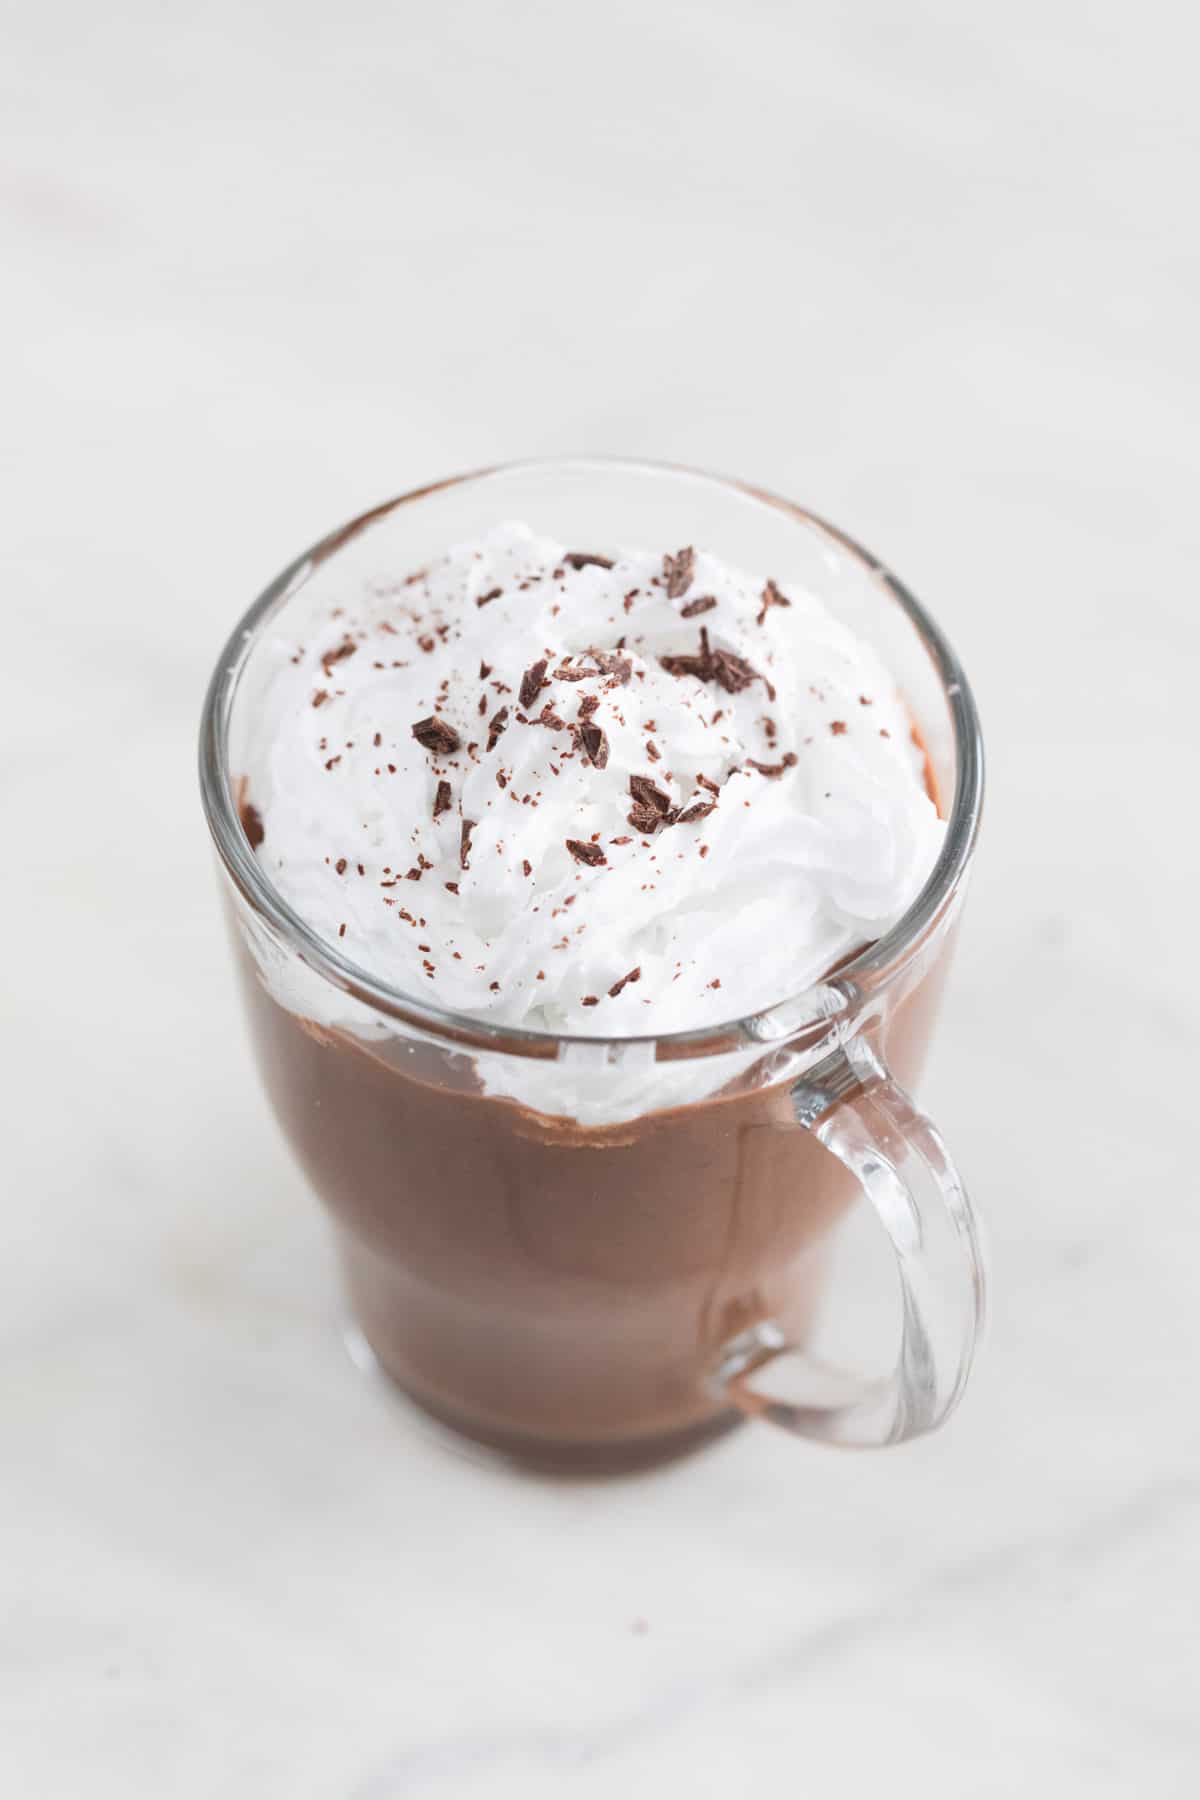 A jar of vegan hot chocolate with vegan whipped cream and chopped dark chocolate on top.